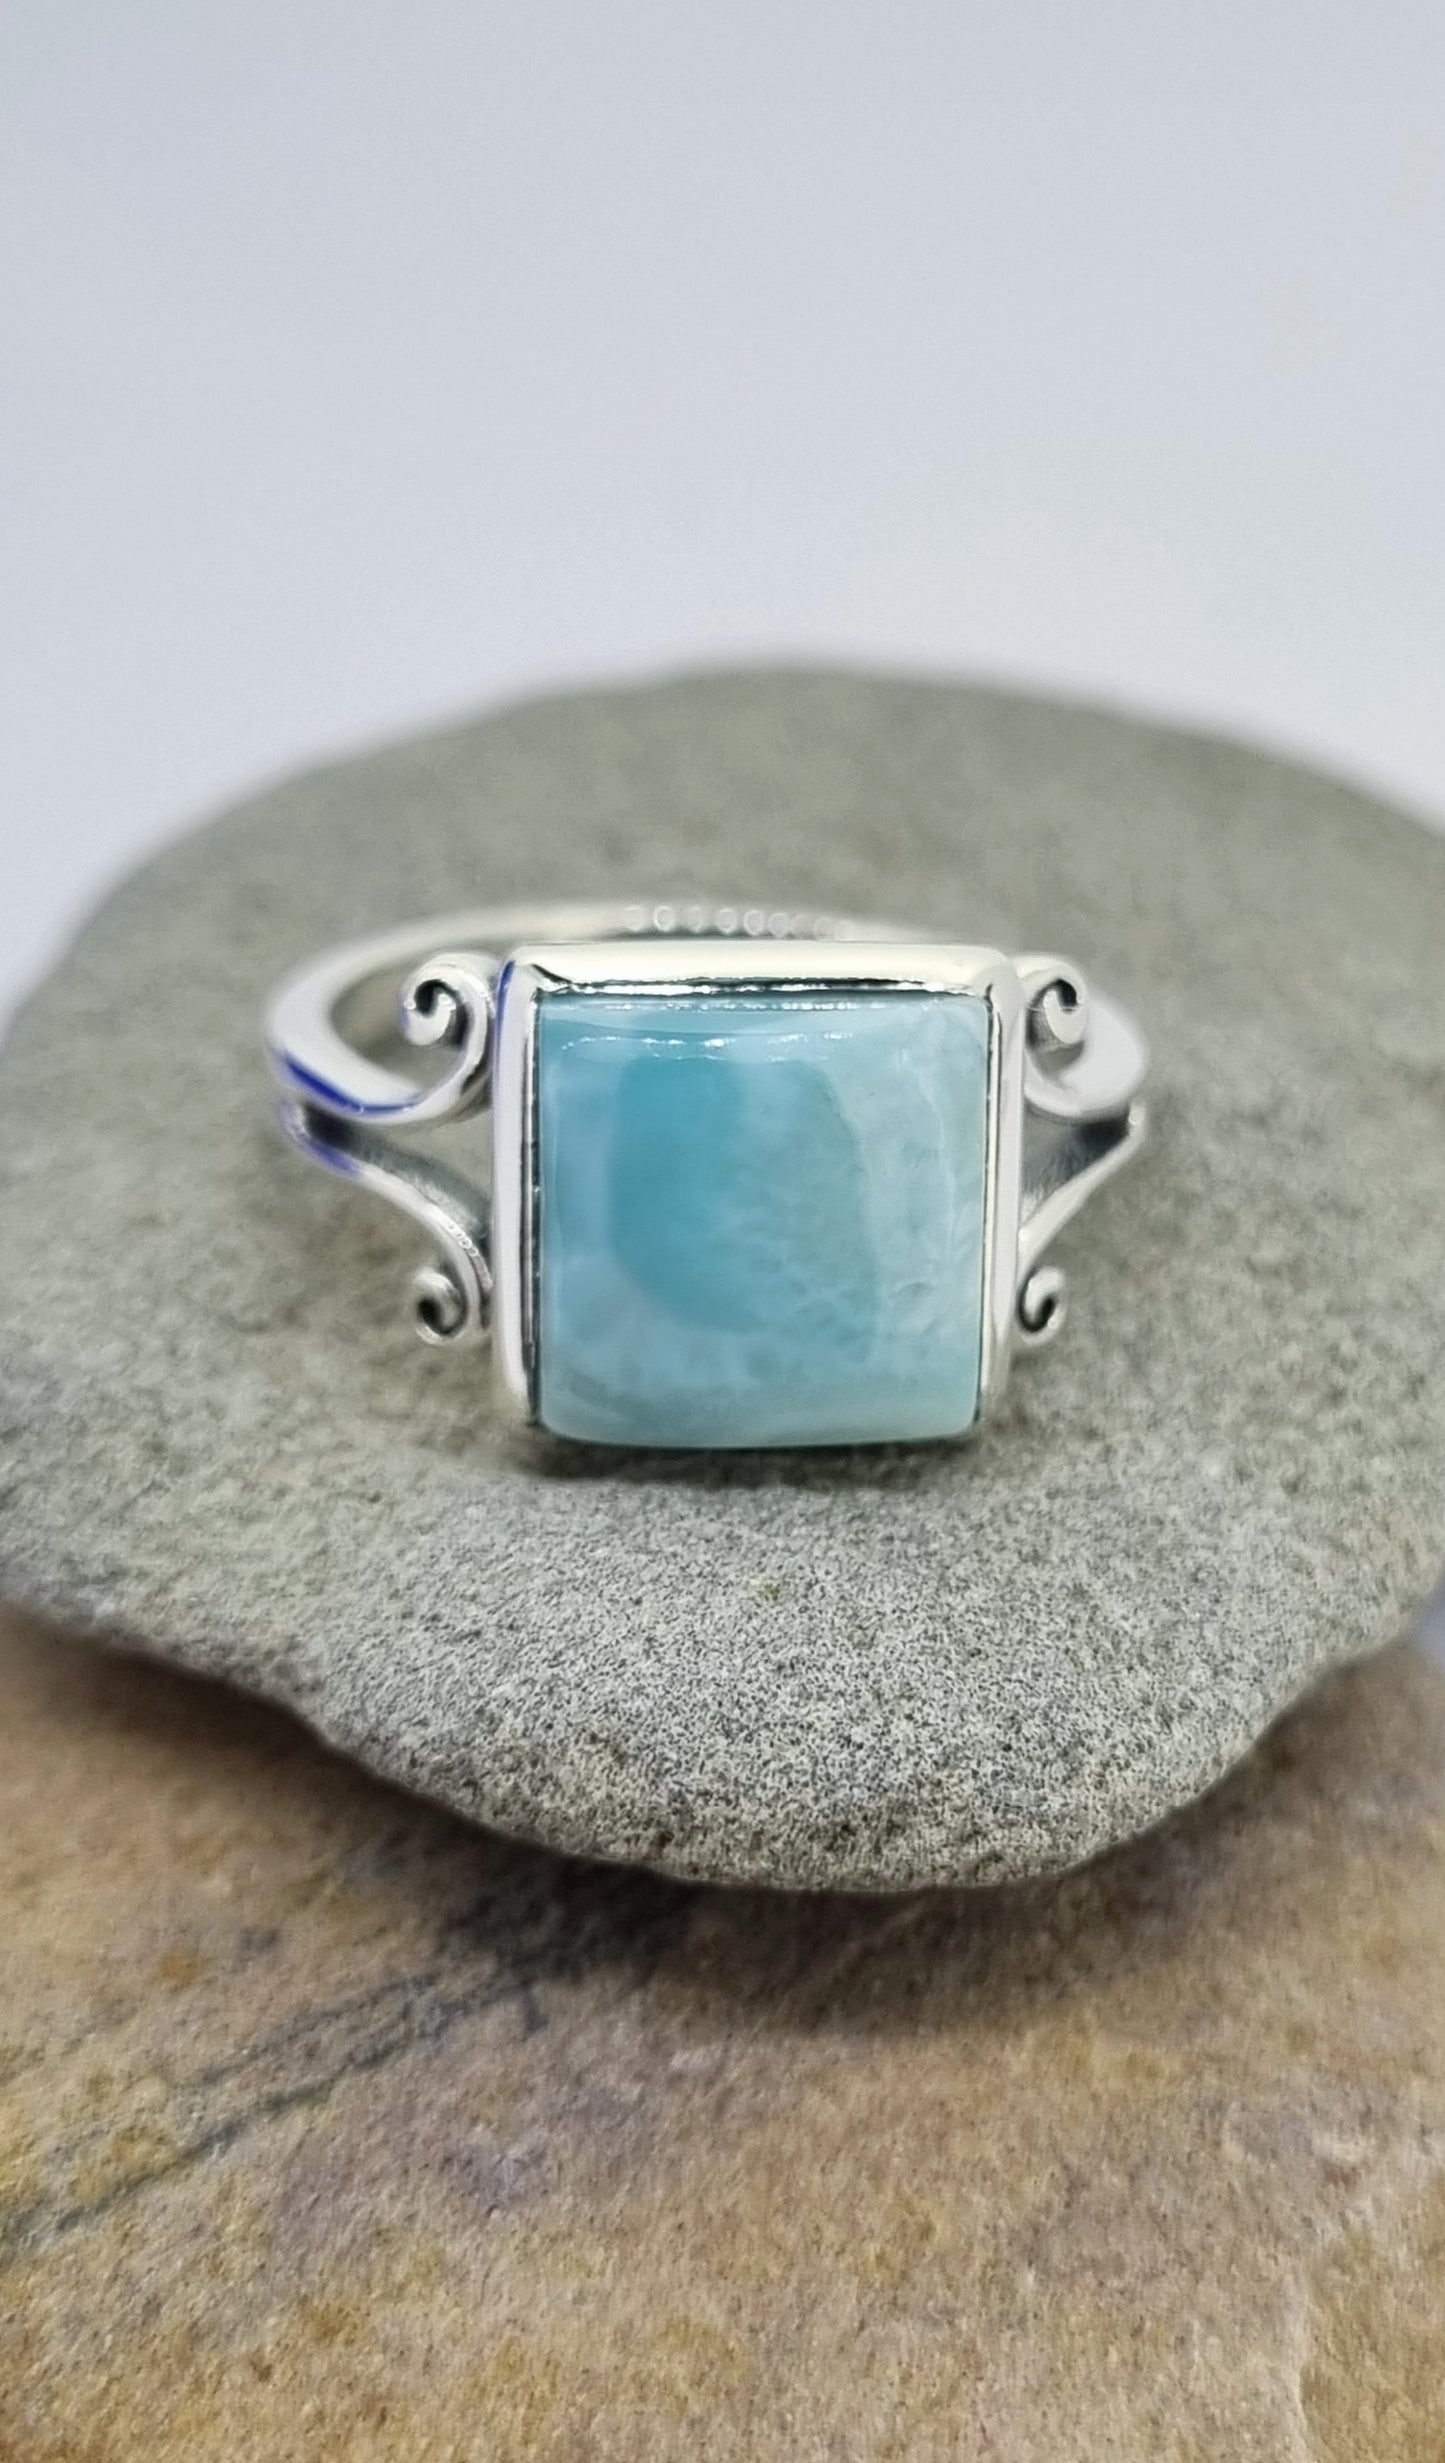 What a little beauty! Exquisite silky Larimar ring adorned by swirling sterling silver.